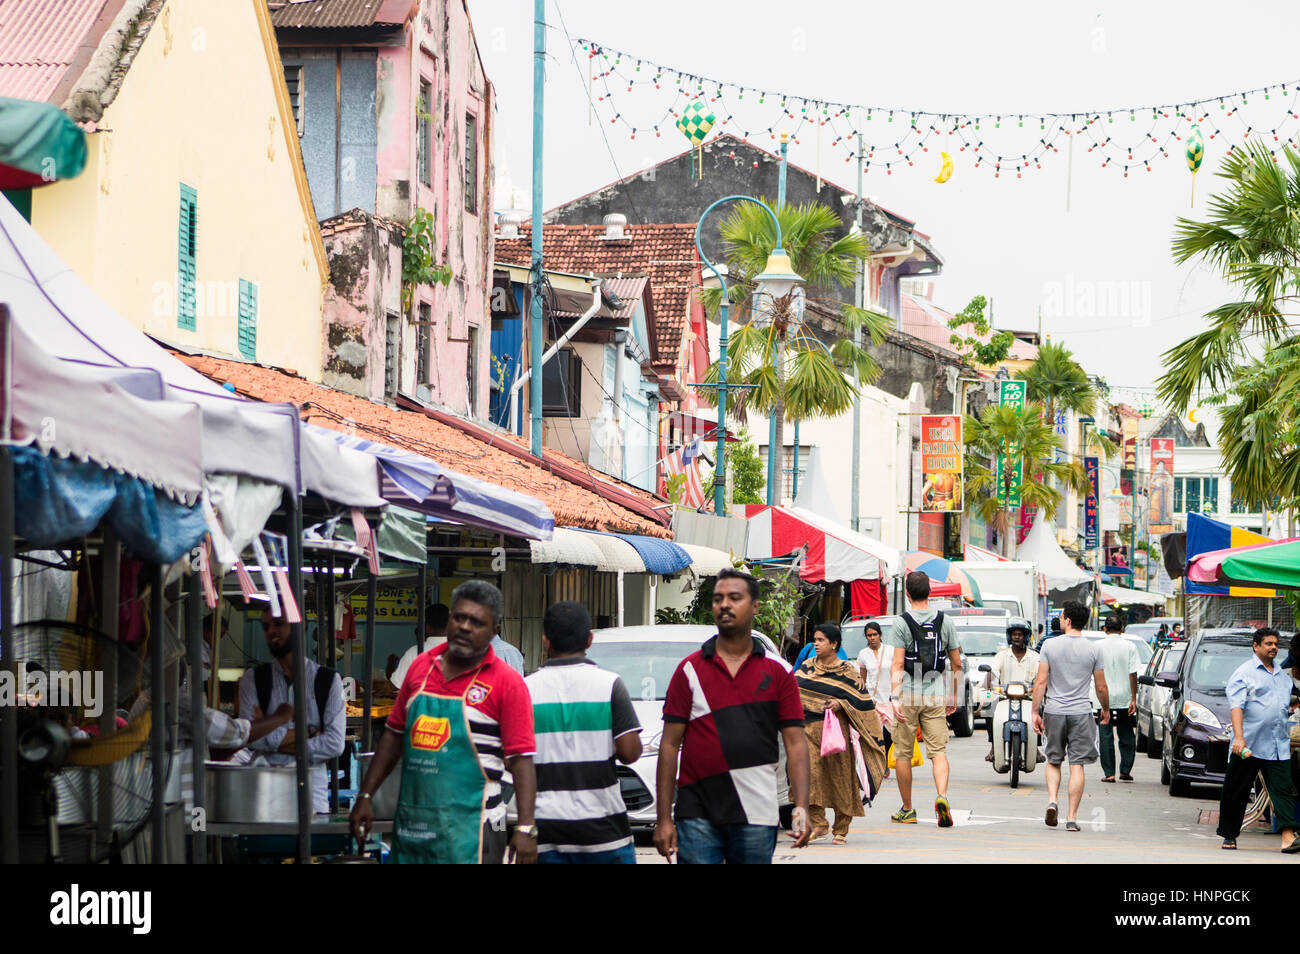 Street scene with indian shops and stall, Lebuh Pasar, Little India, Georgetown, Penang, Malaysia Stock Photo